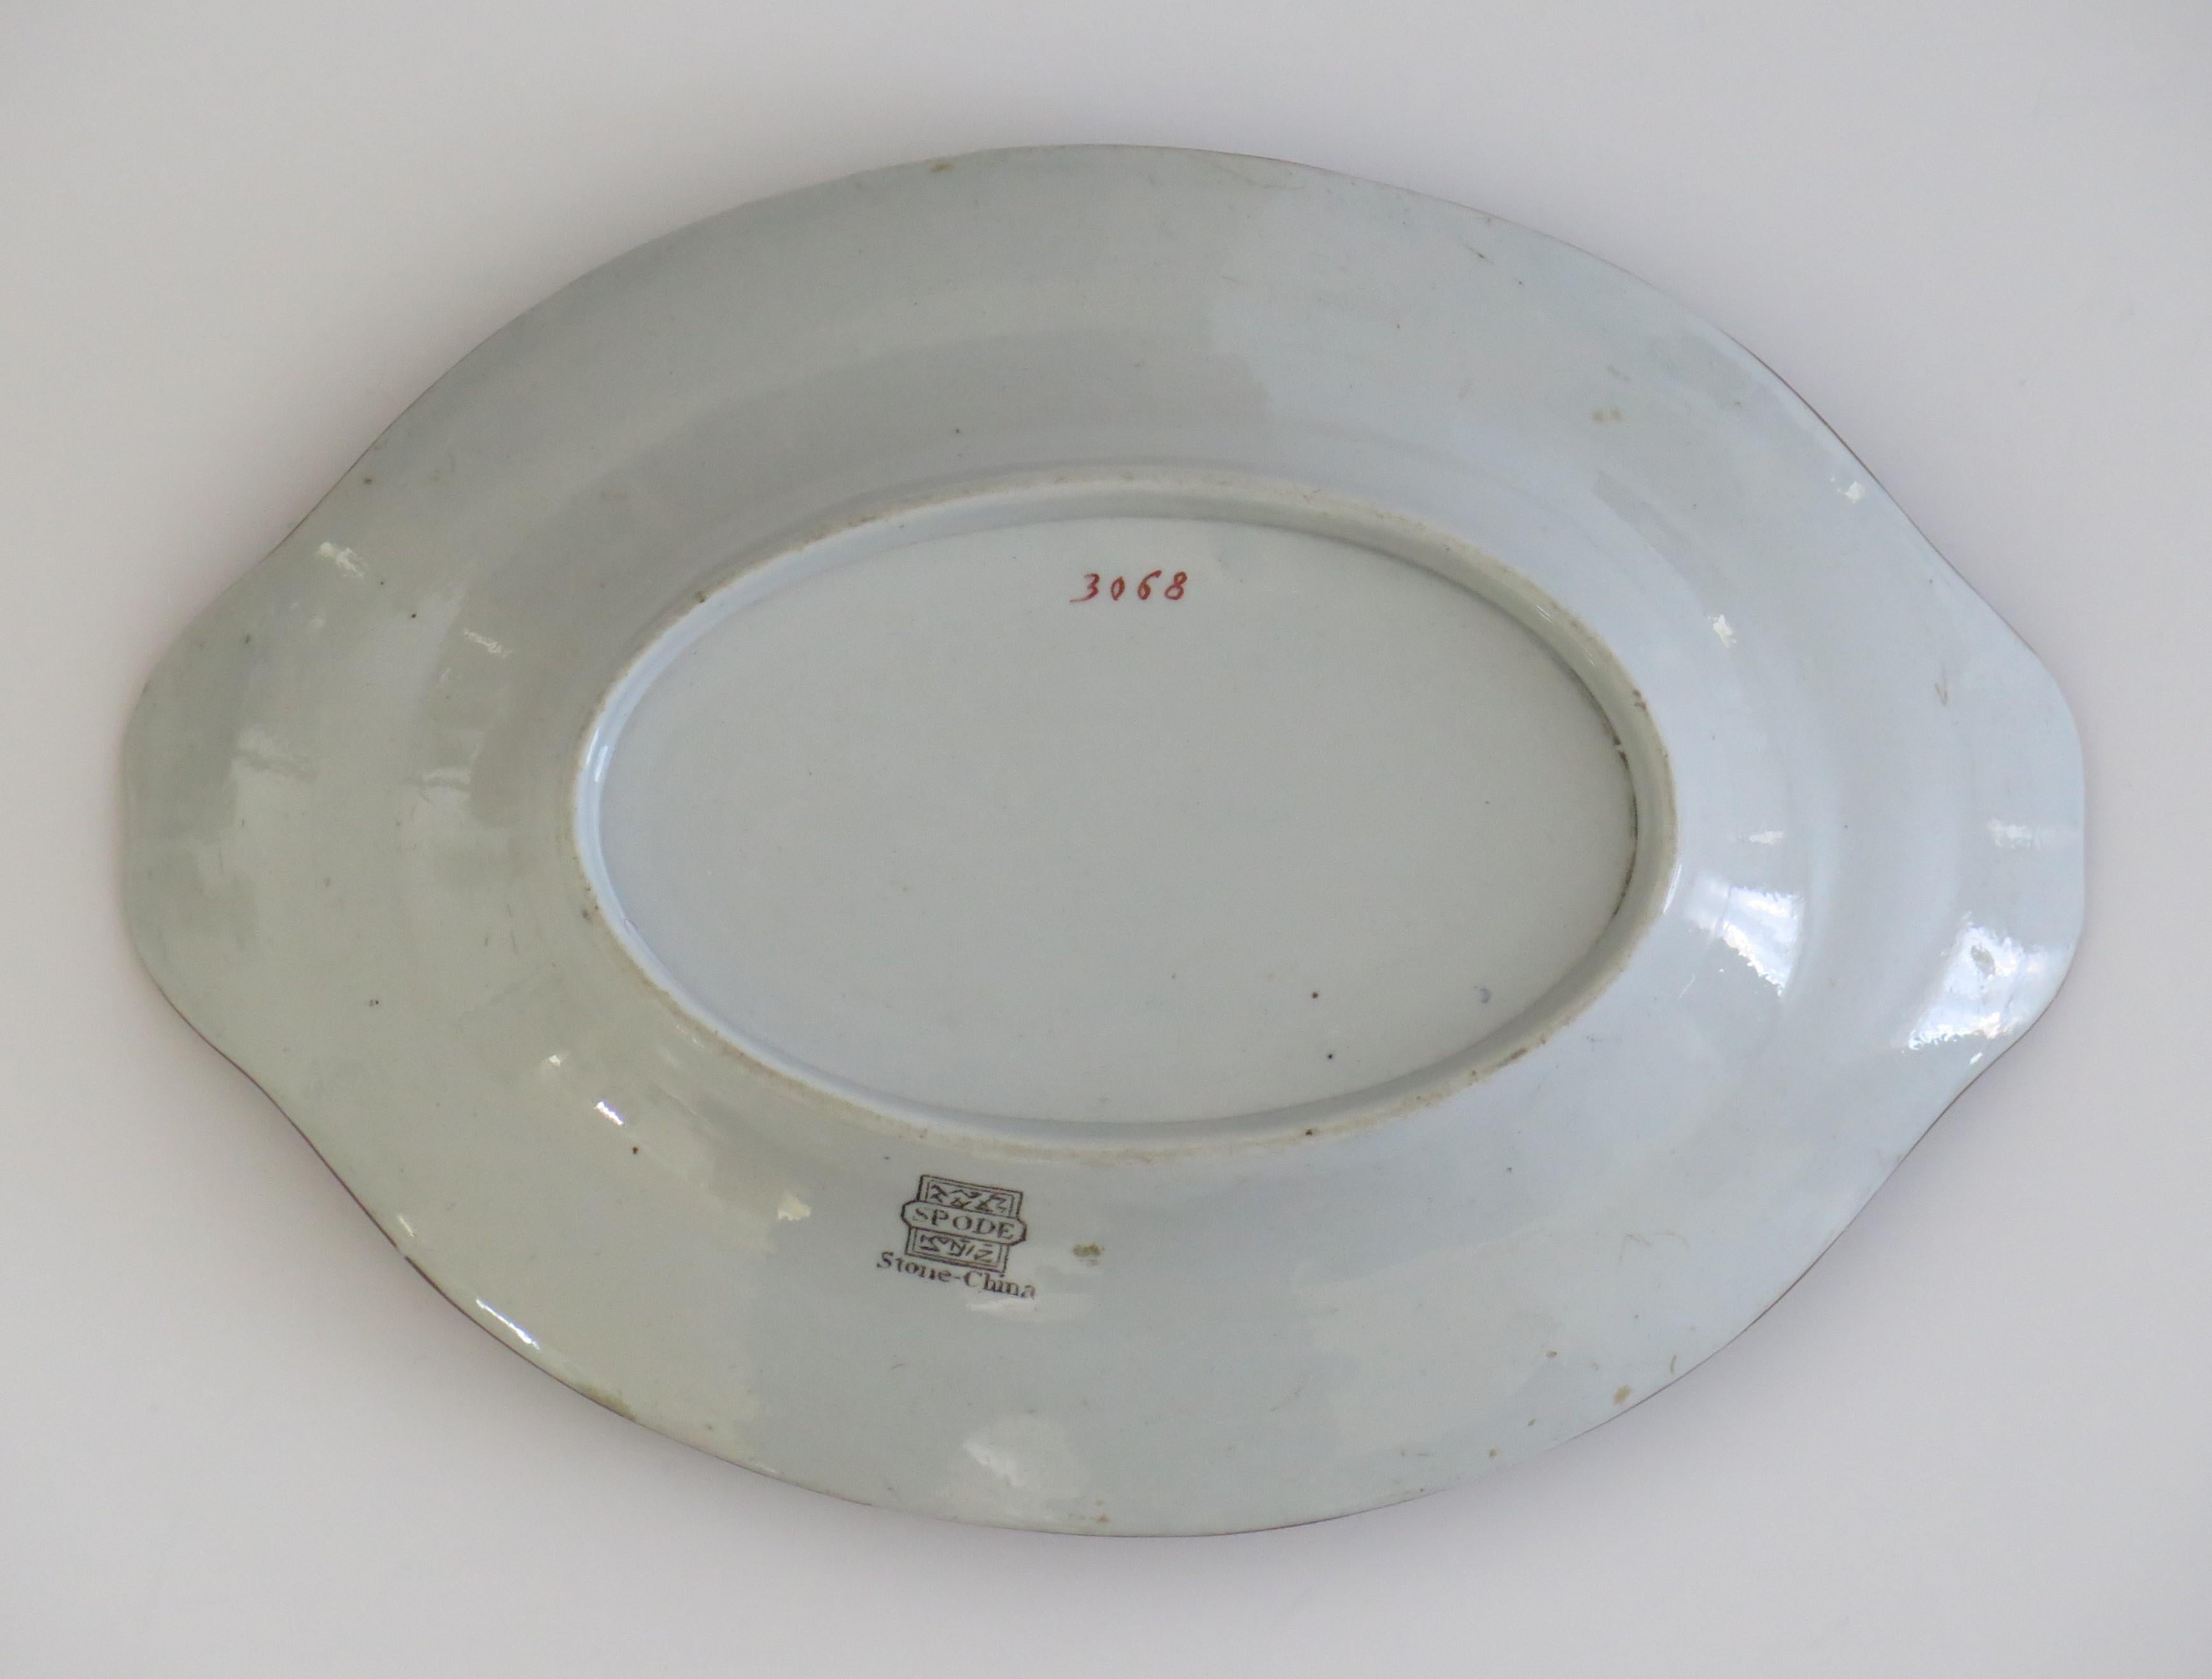 Ironstone Spode Stone China Small Serving Dish in Ship Pattern 3068, circa 1810 For Sale